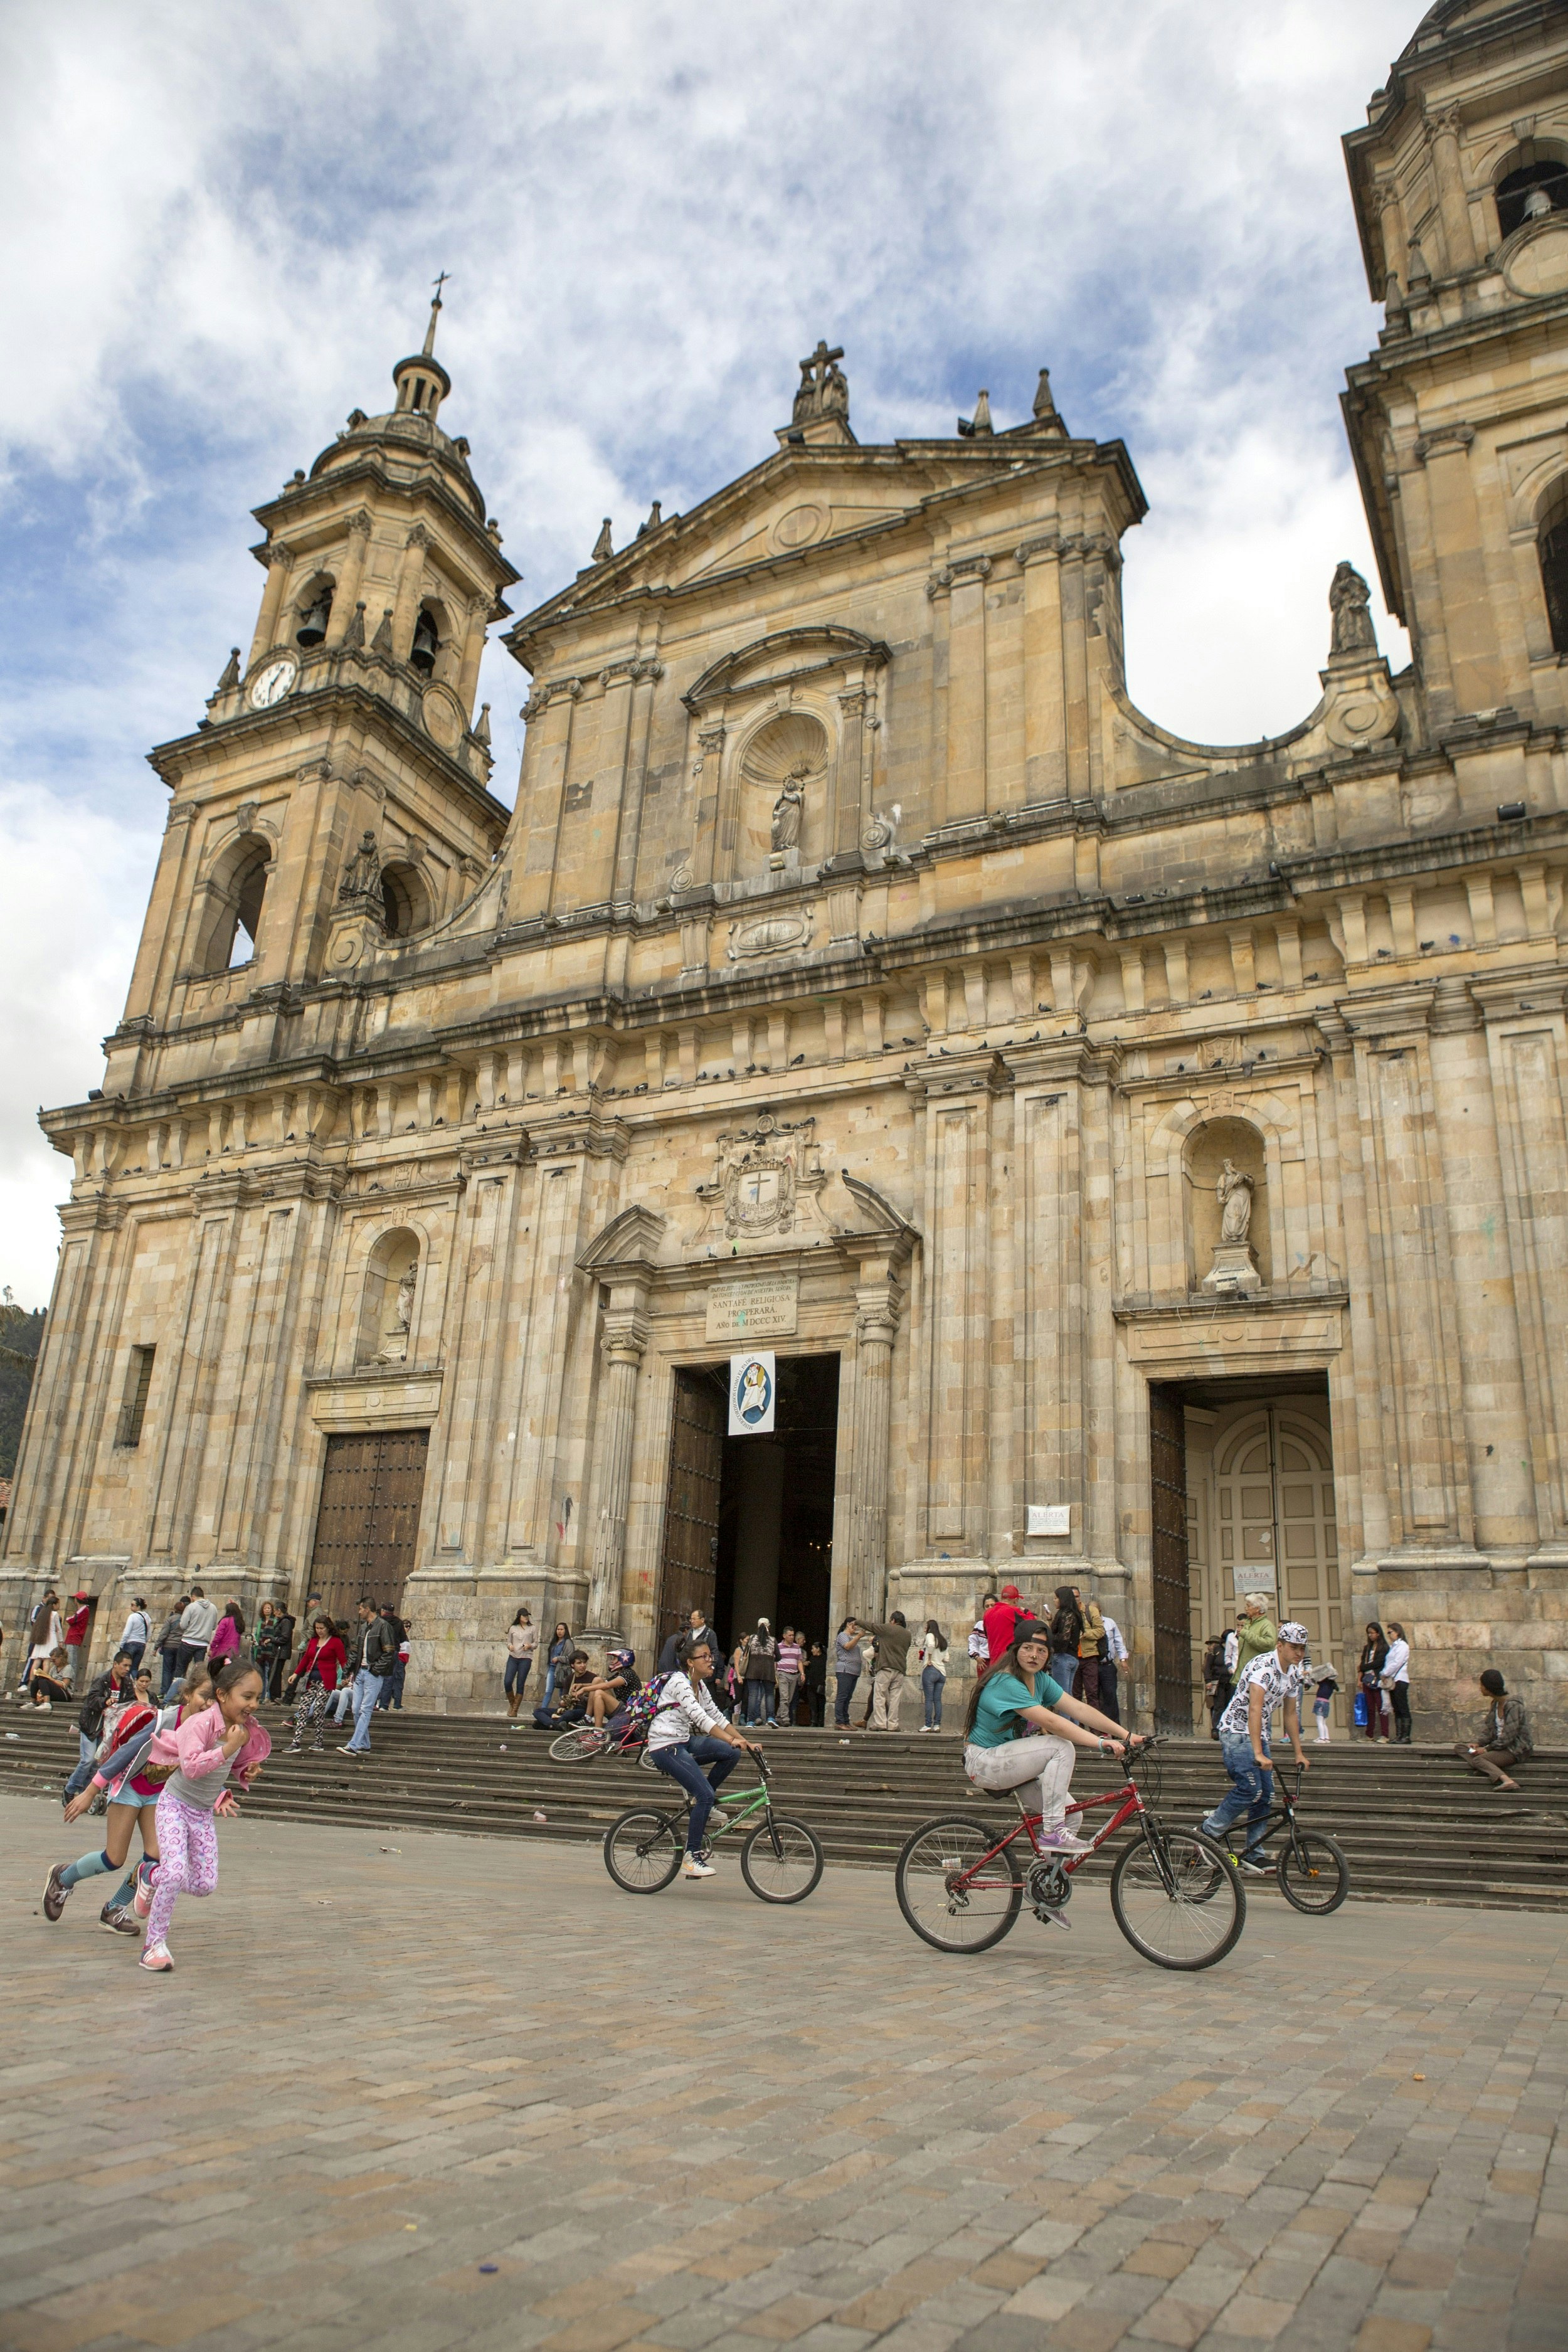 Some young children on bikes cycle past La Catedral Primada in the city's main plaza